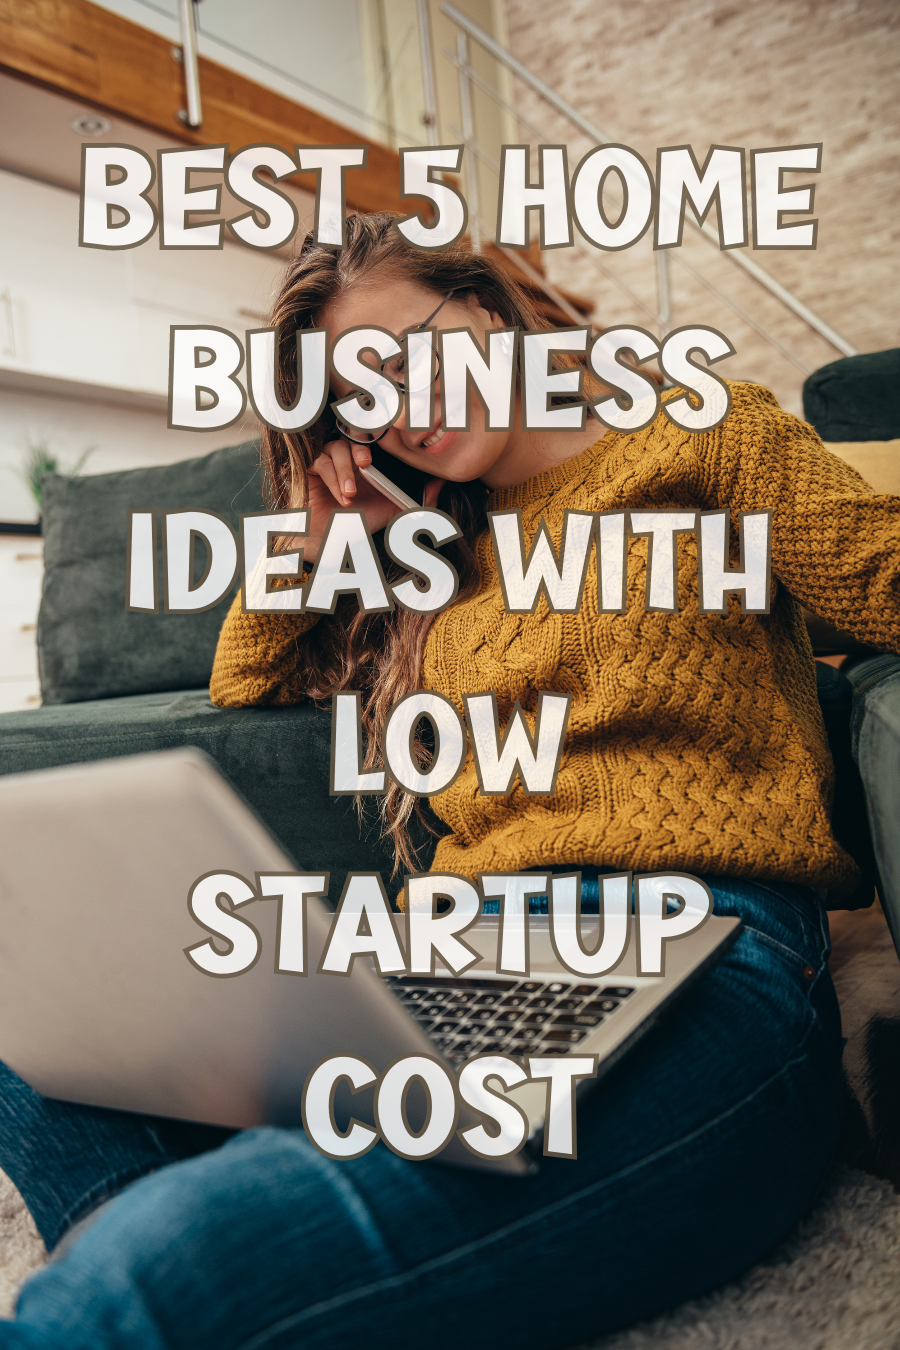 Best 5 Home Business Ideas with Low Startup Cost